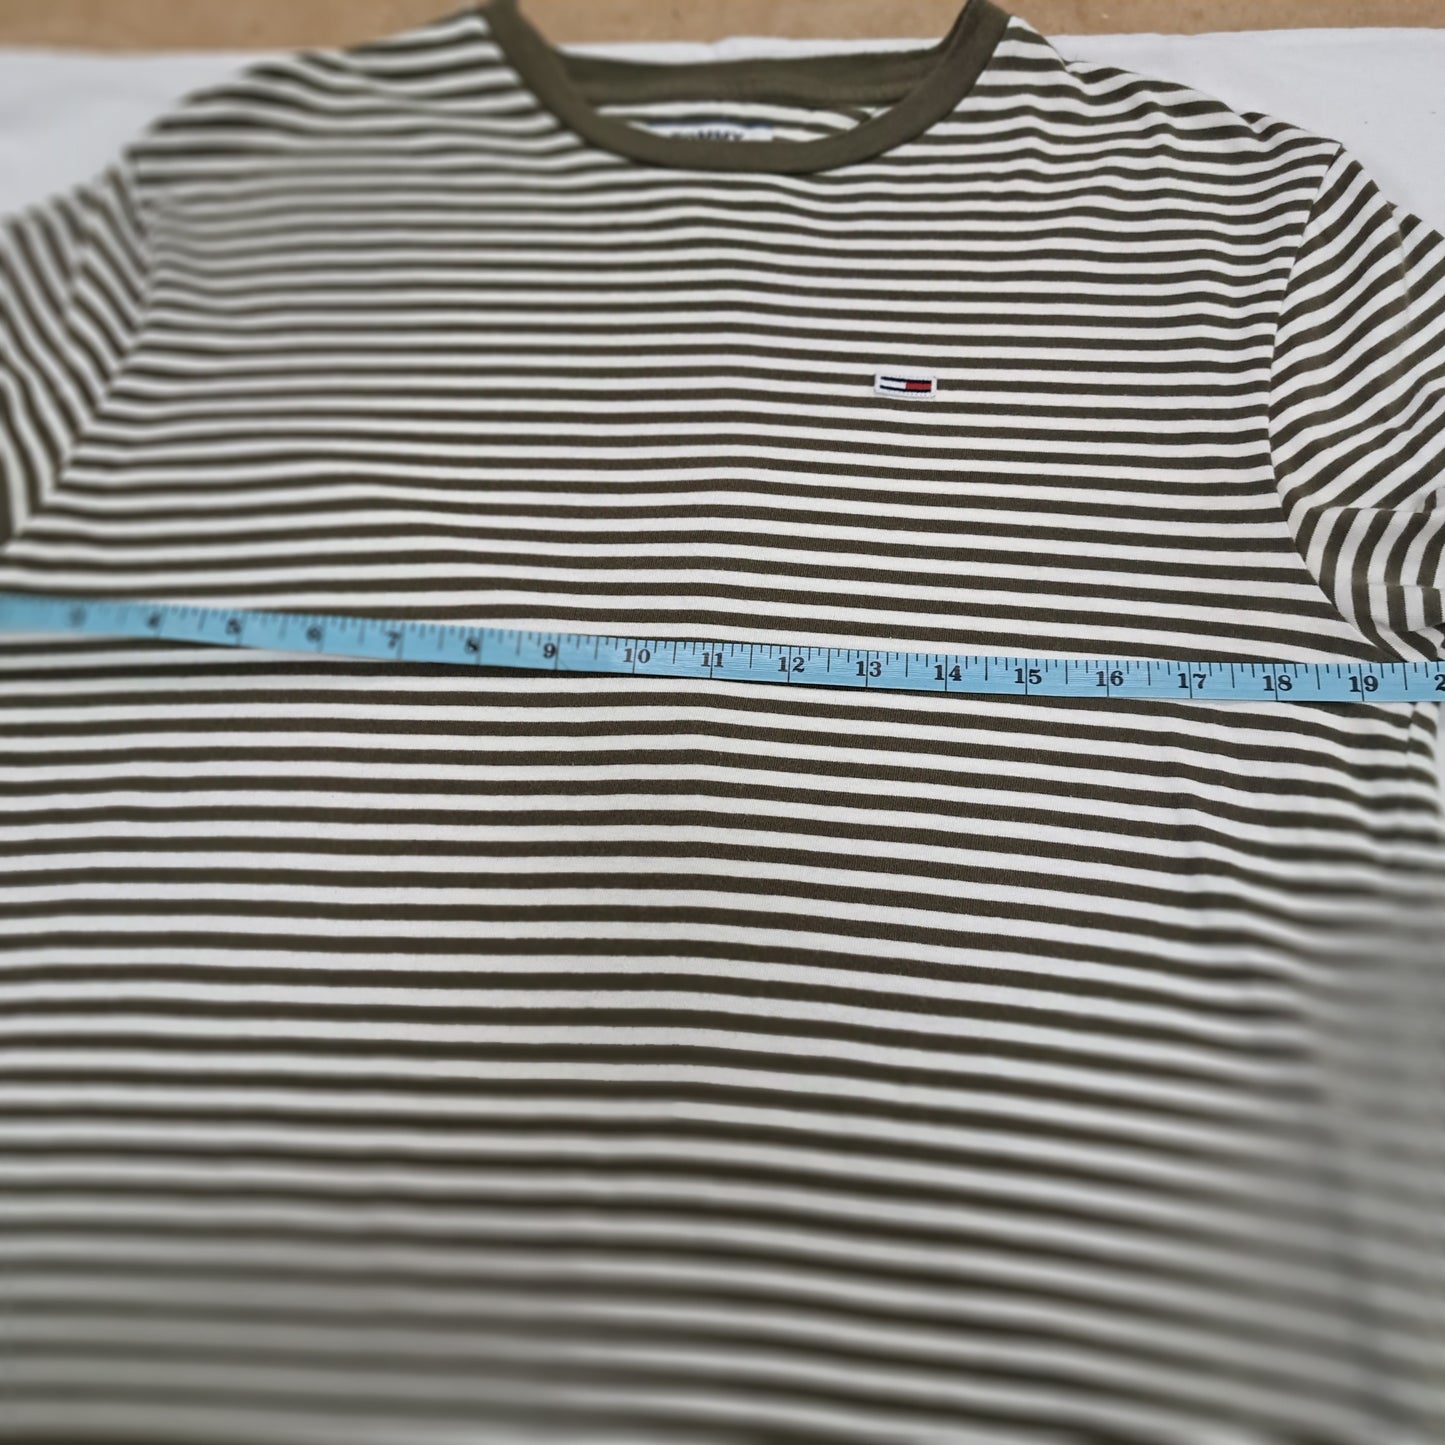 Tommy Hilfiger Tommy Jeans Stripe Tee Shirt  Olive Green and White Size Medium